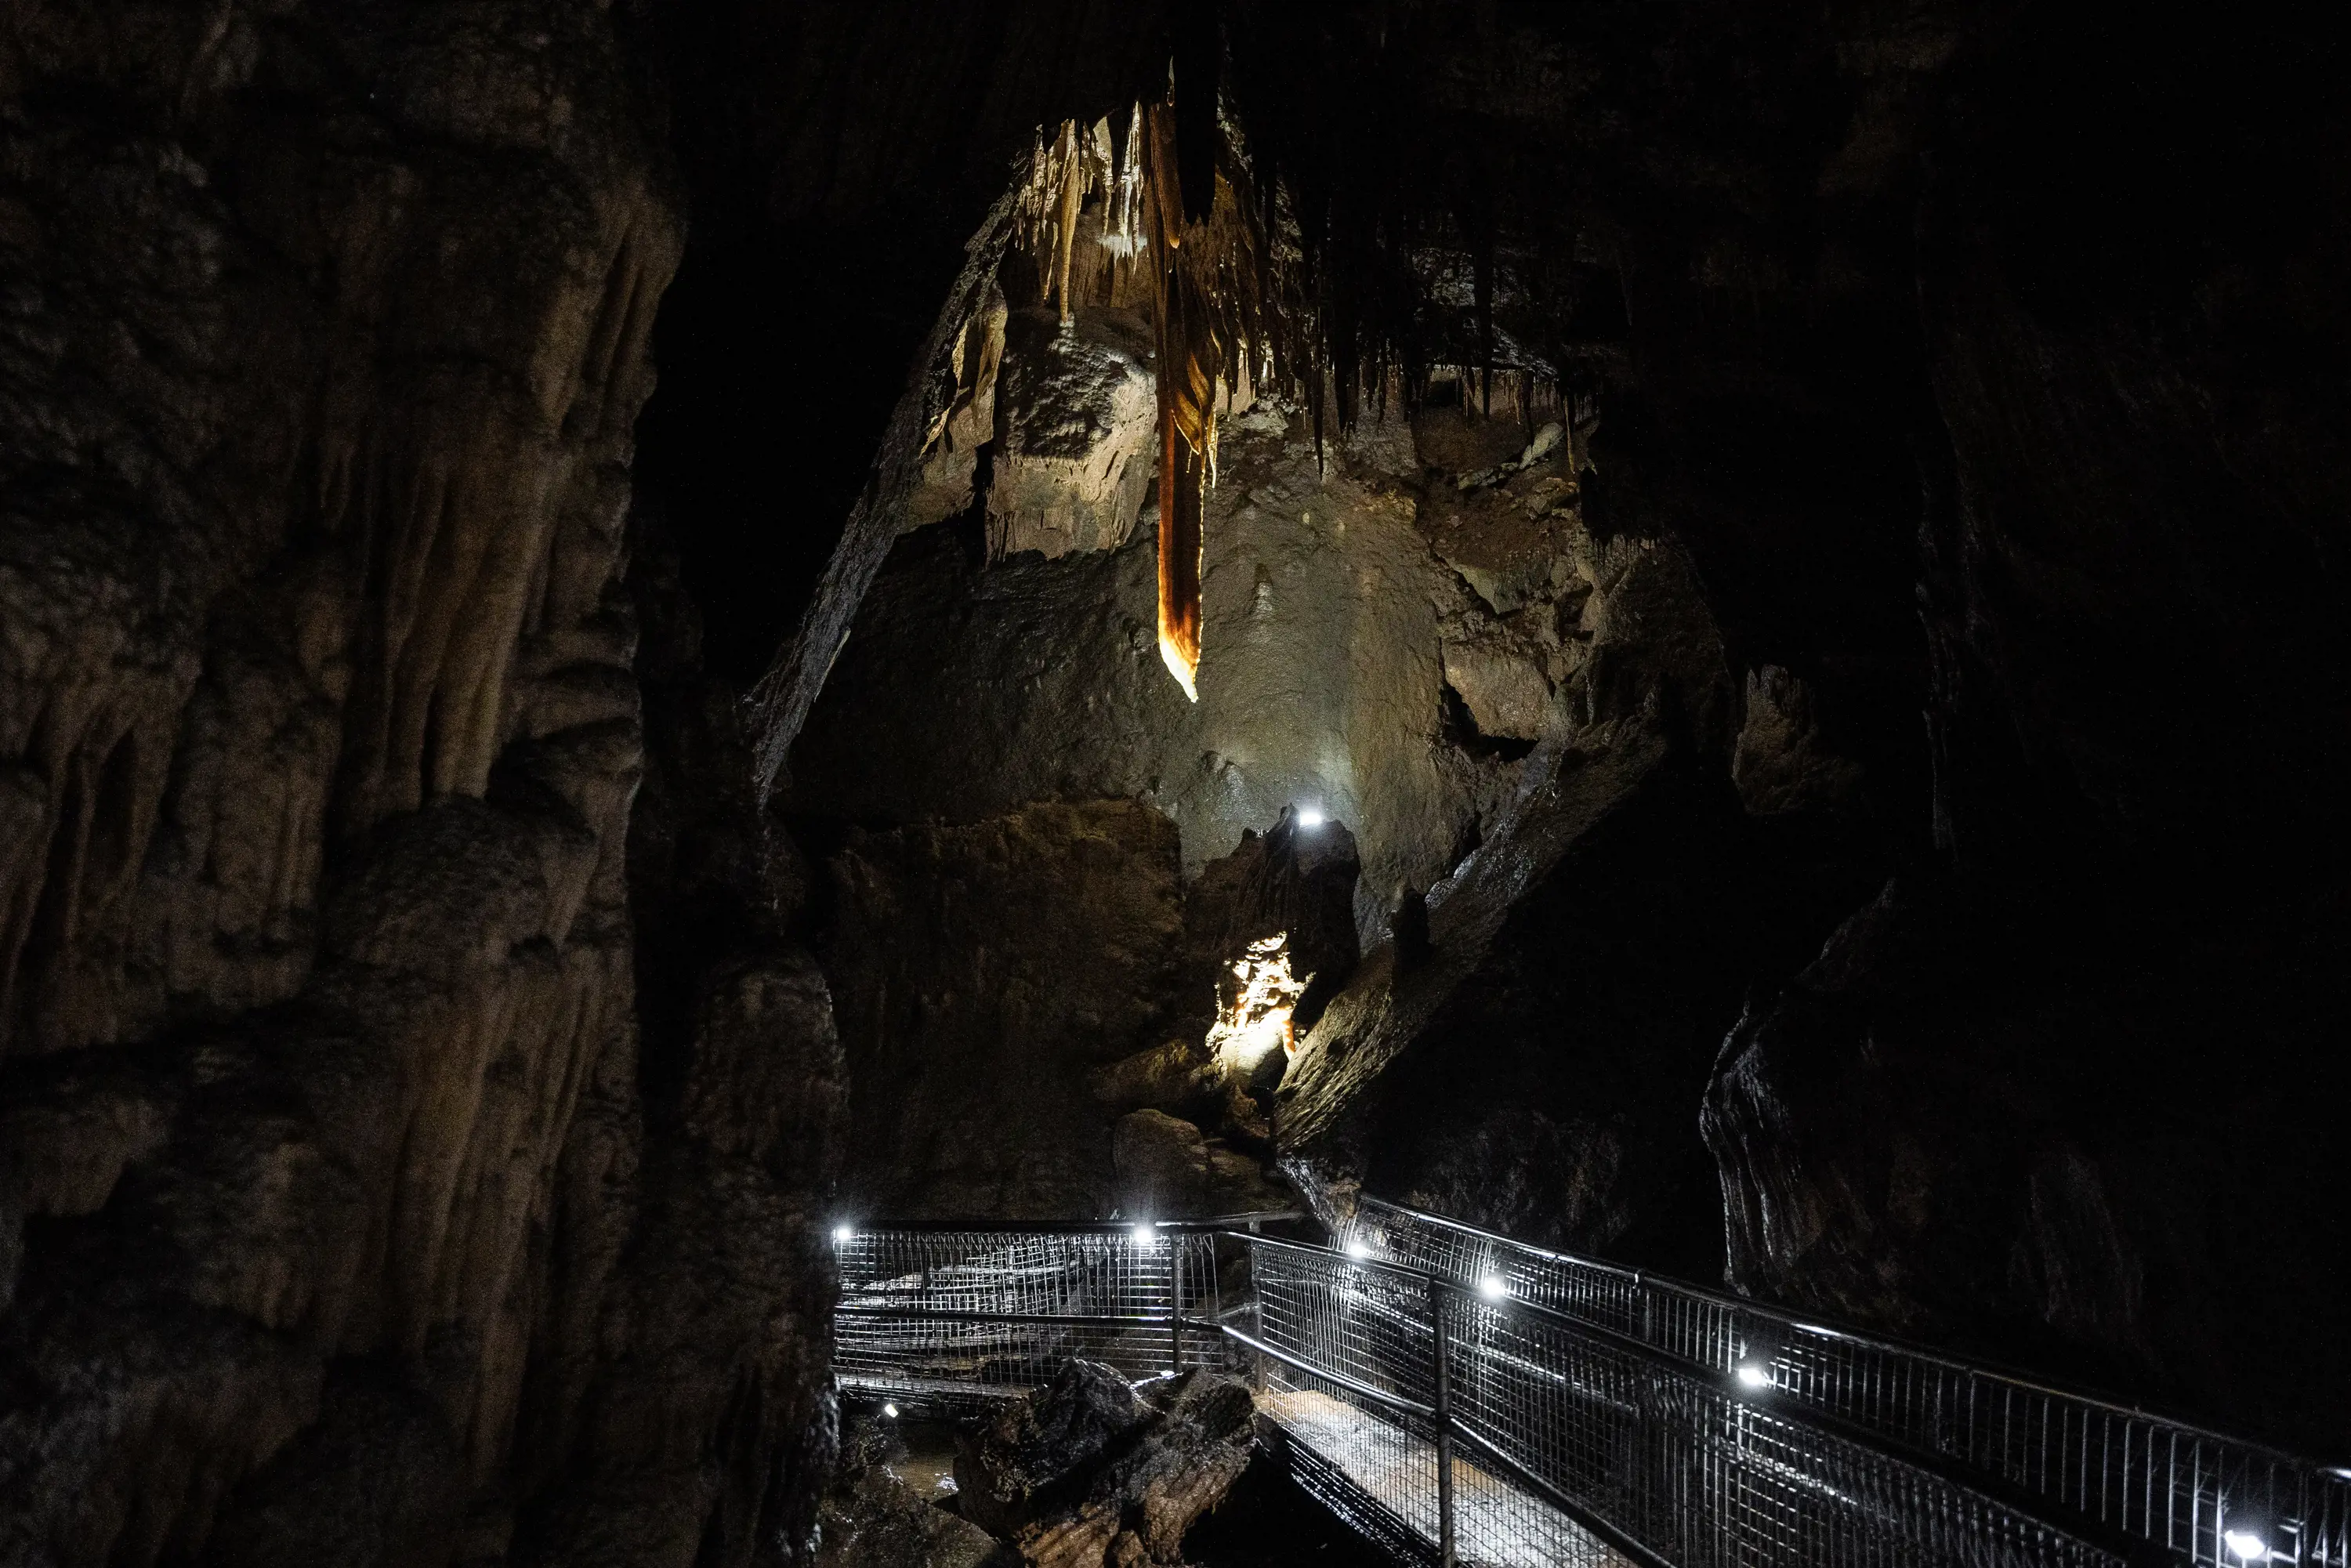 A large cave with a a metal walkway below a stalactite hanging from the cave ceiling.